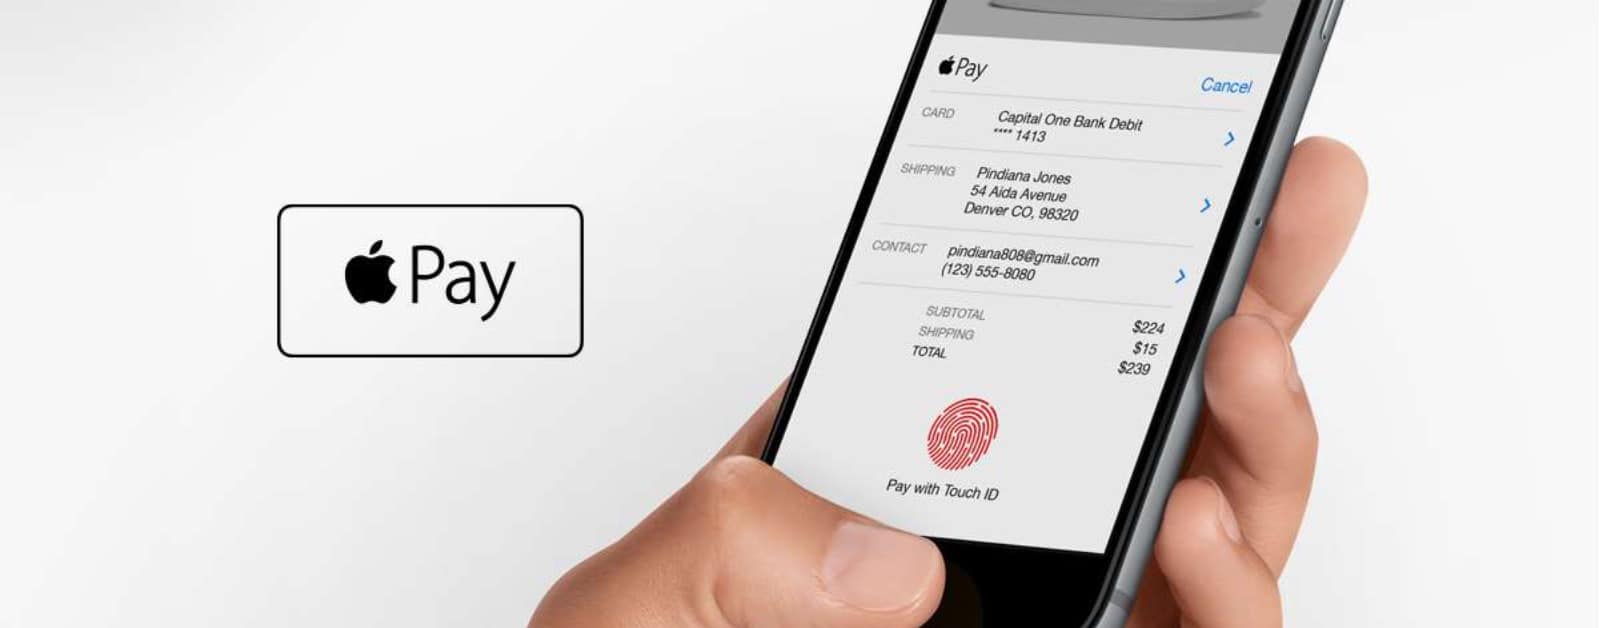 Popular Punchh Restaurant Loyalty Program Comes to Apple Pay